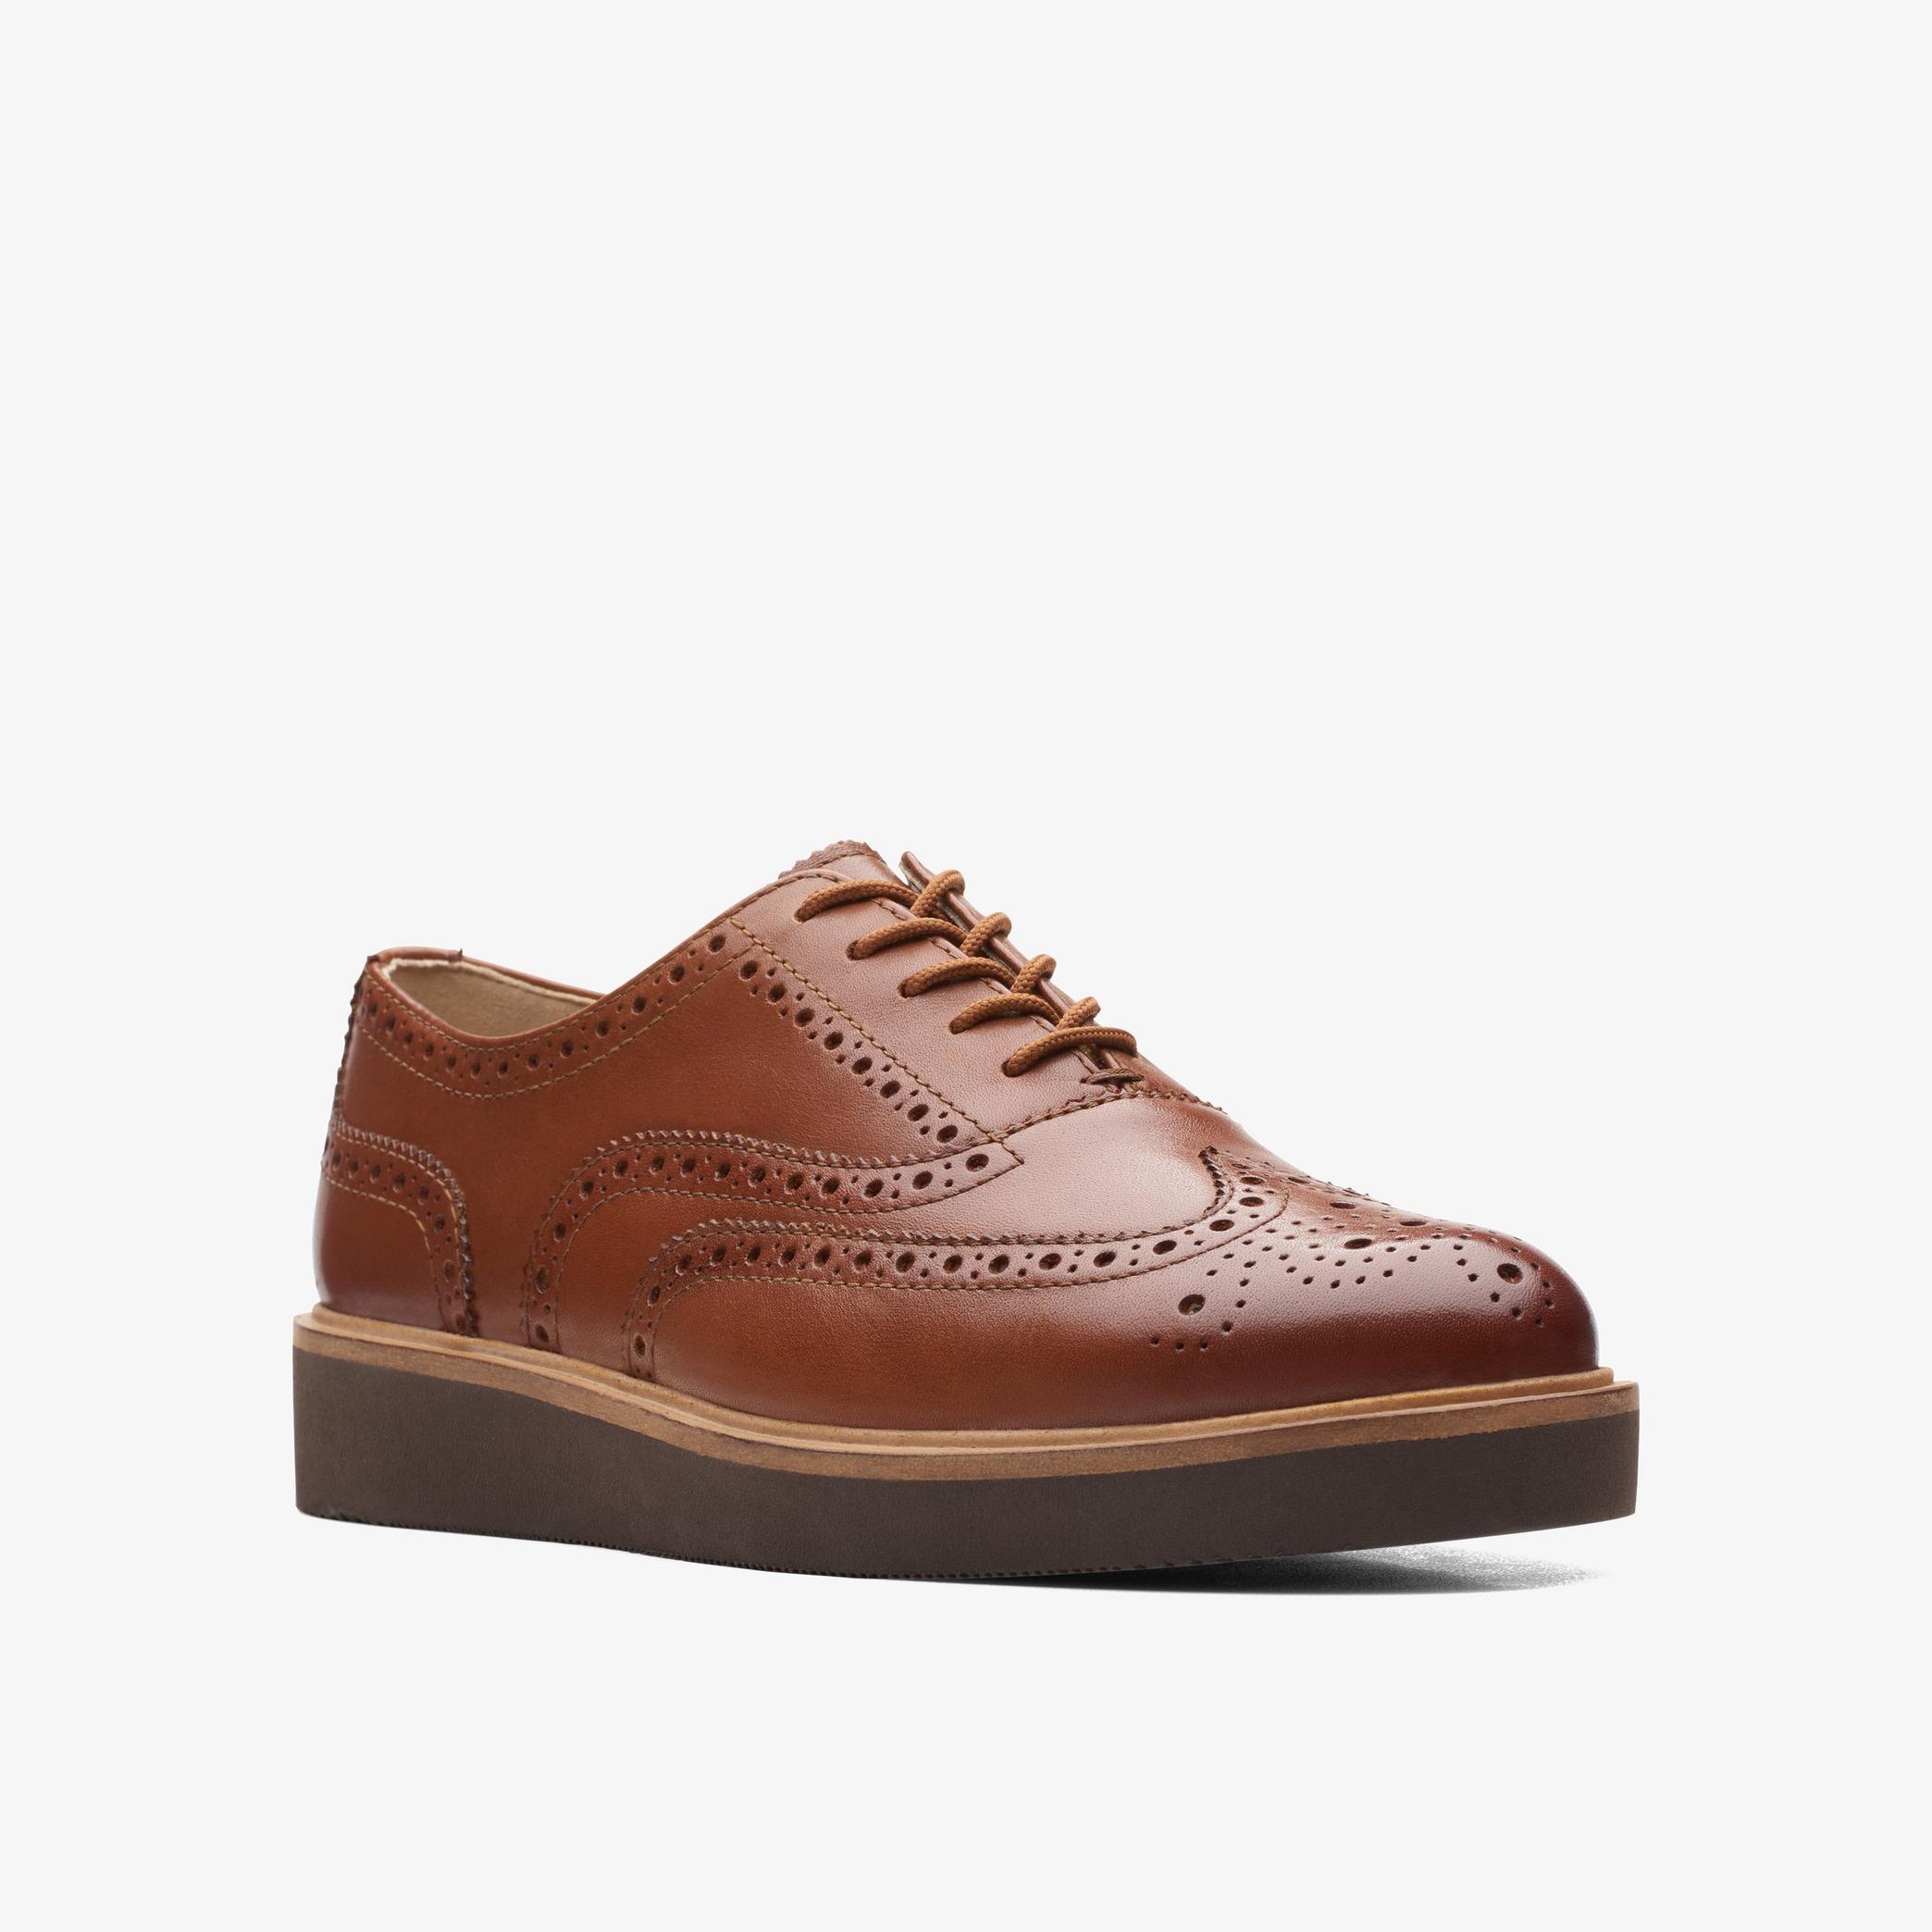 Glickly Brogue Dark Tan Leather Brogues, view 3 of 6